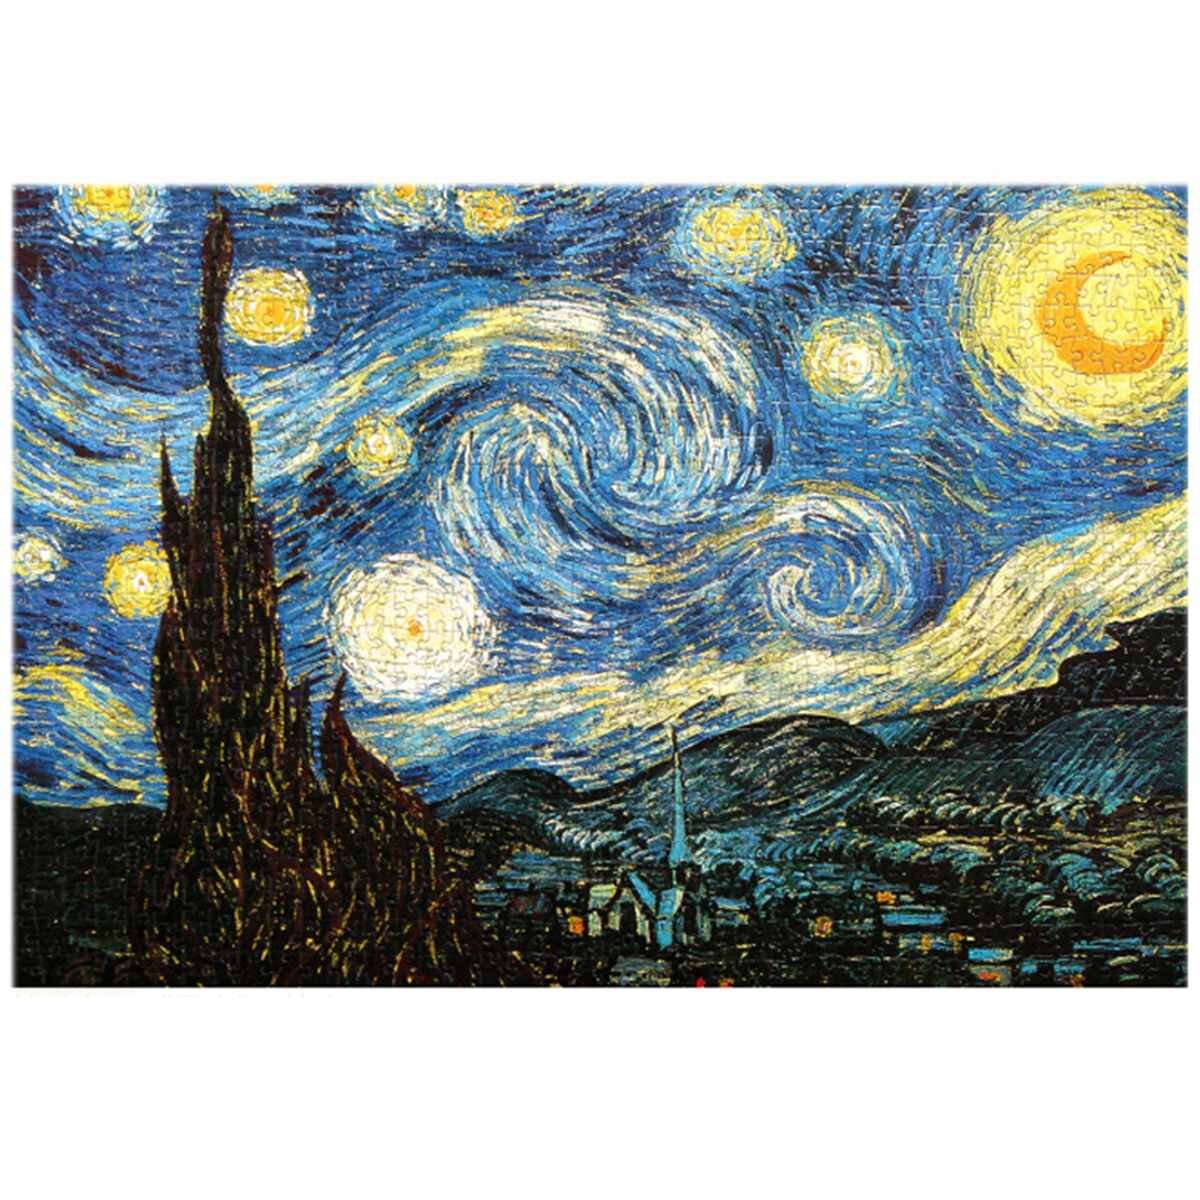 1000 Pieces Nuit Etoilee DIY Assembly Jigsaw Puzzles Landscape Picture Educational Games Toy for Adu